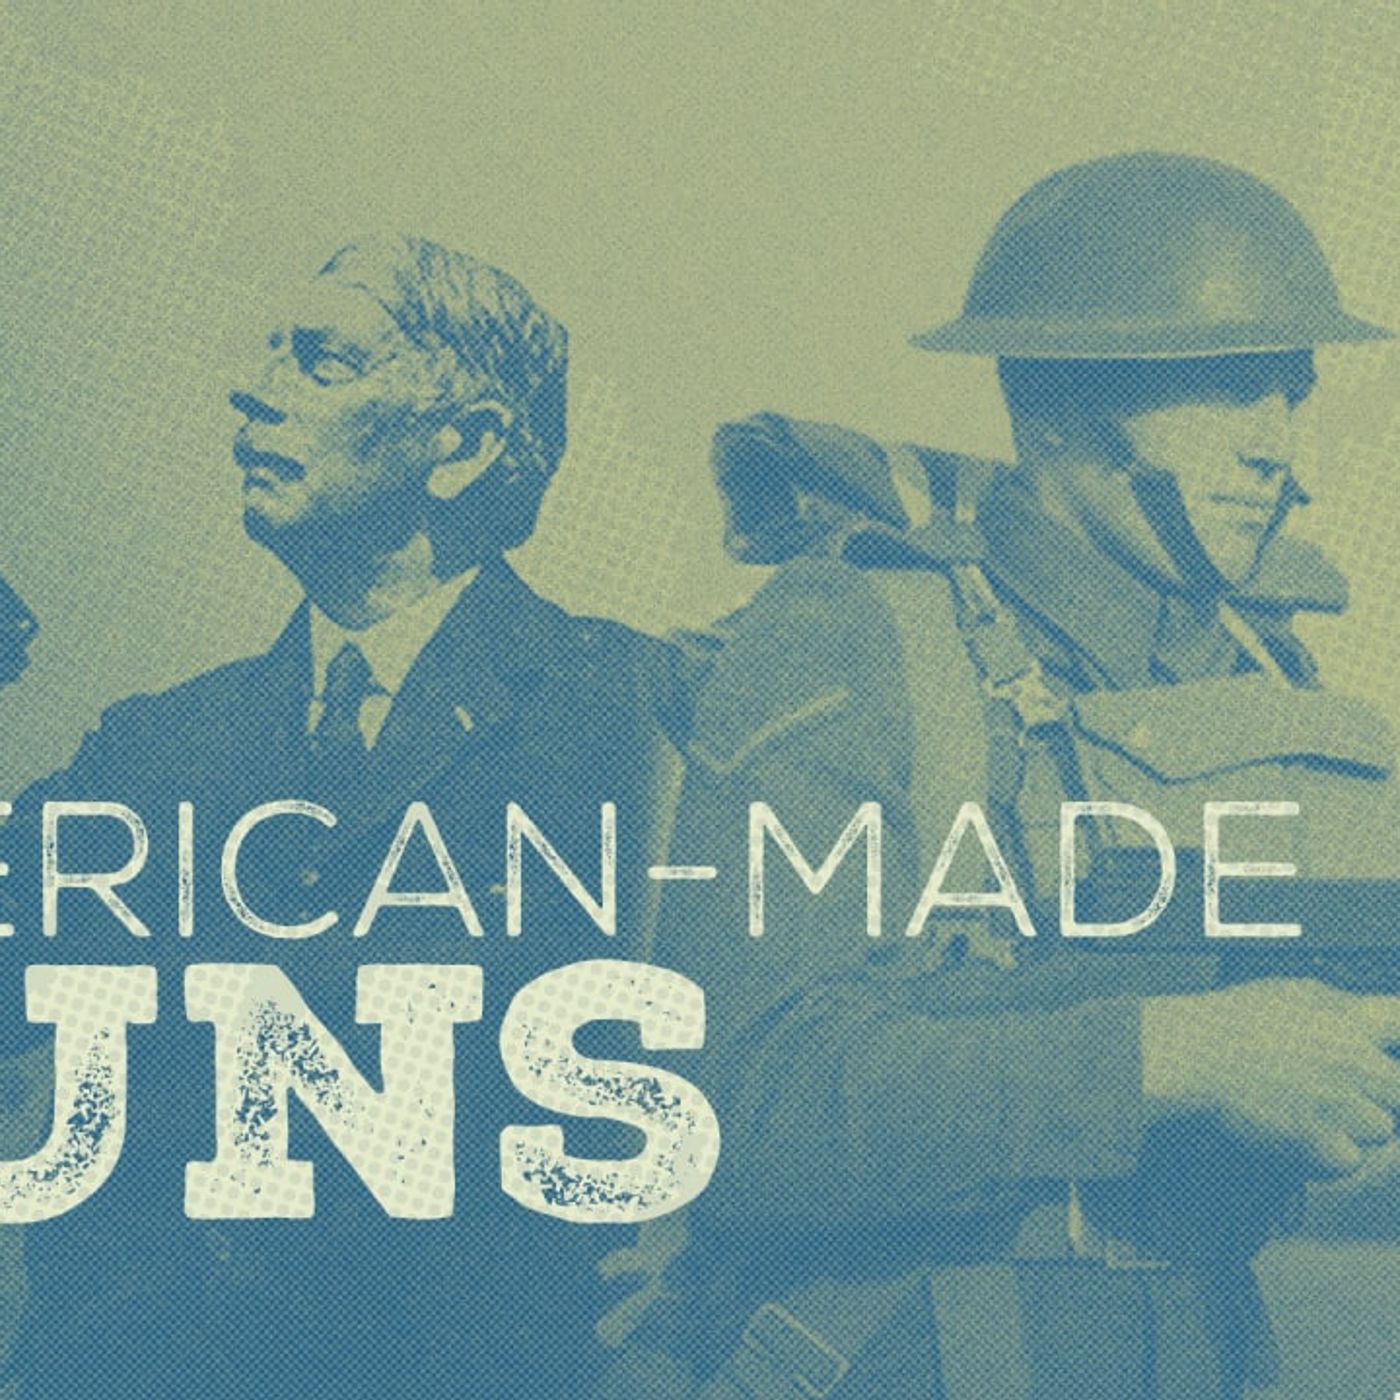 Episode 833: Lee Enfield Talks About Classic American Made Guns With Pete